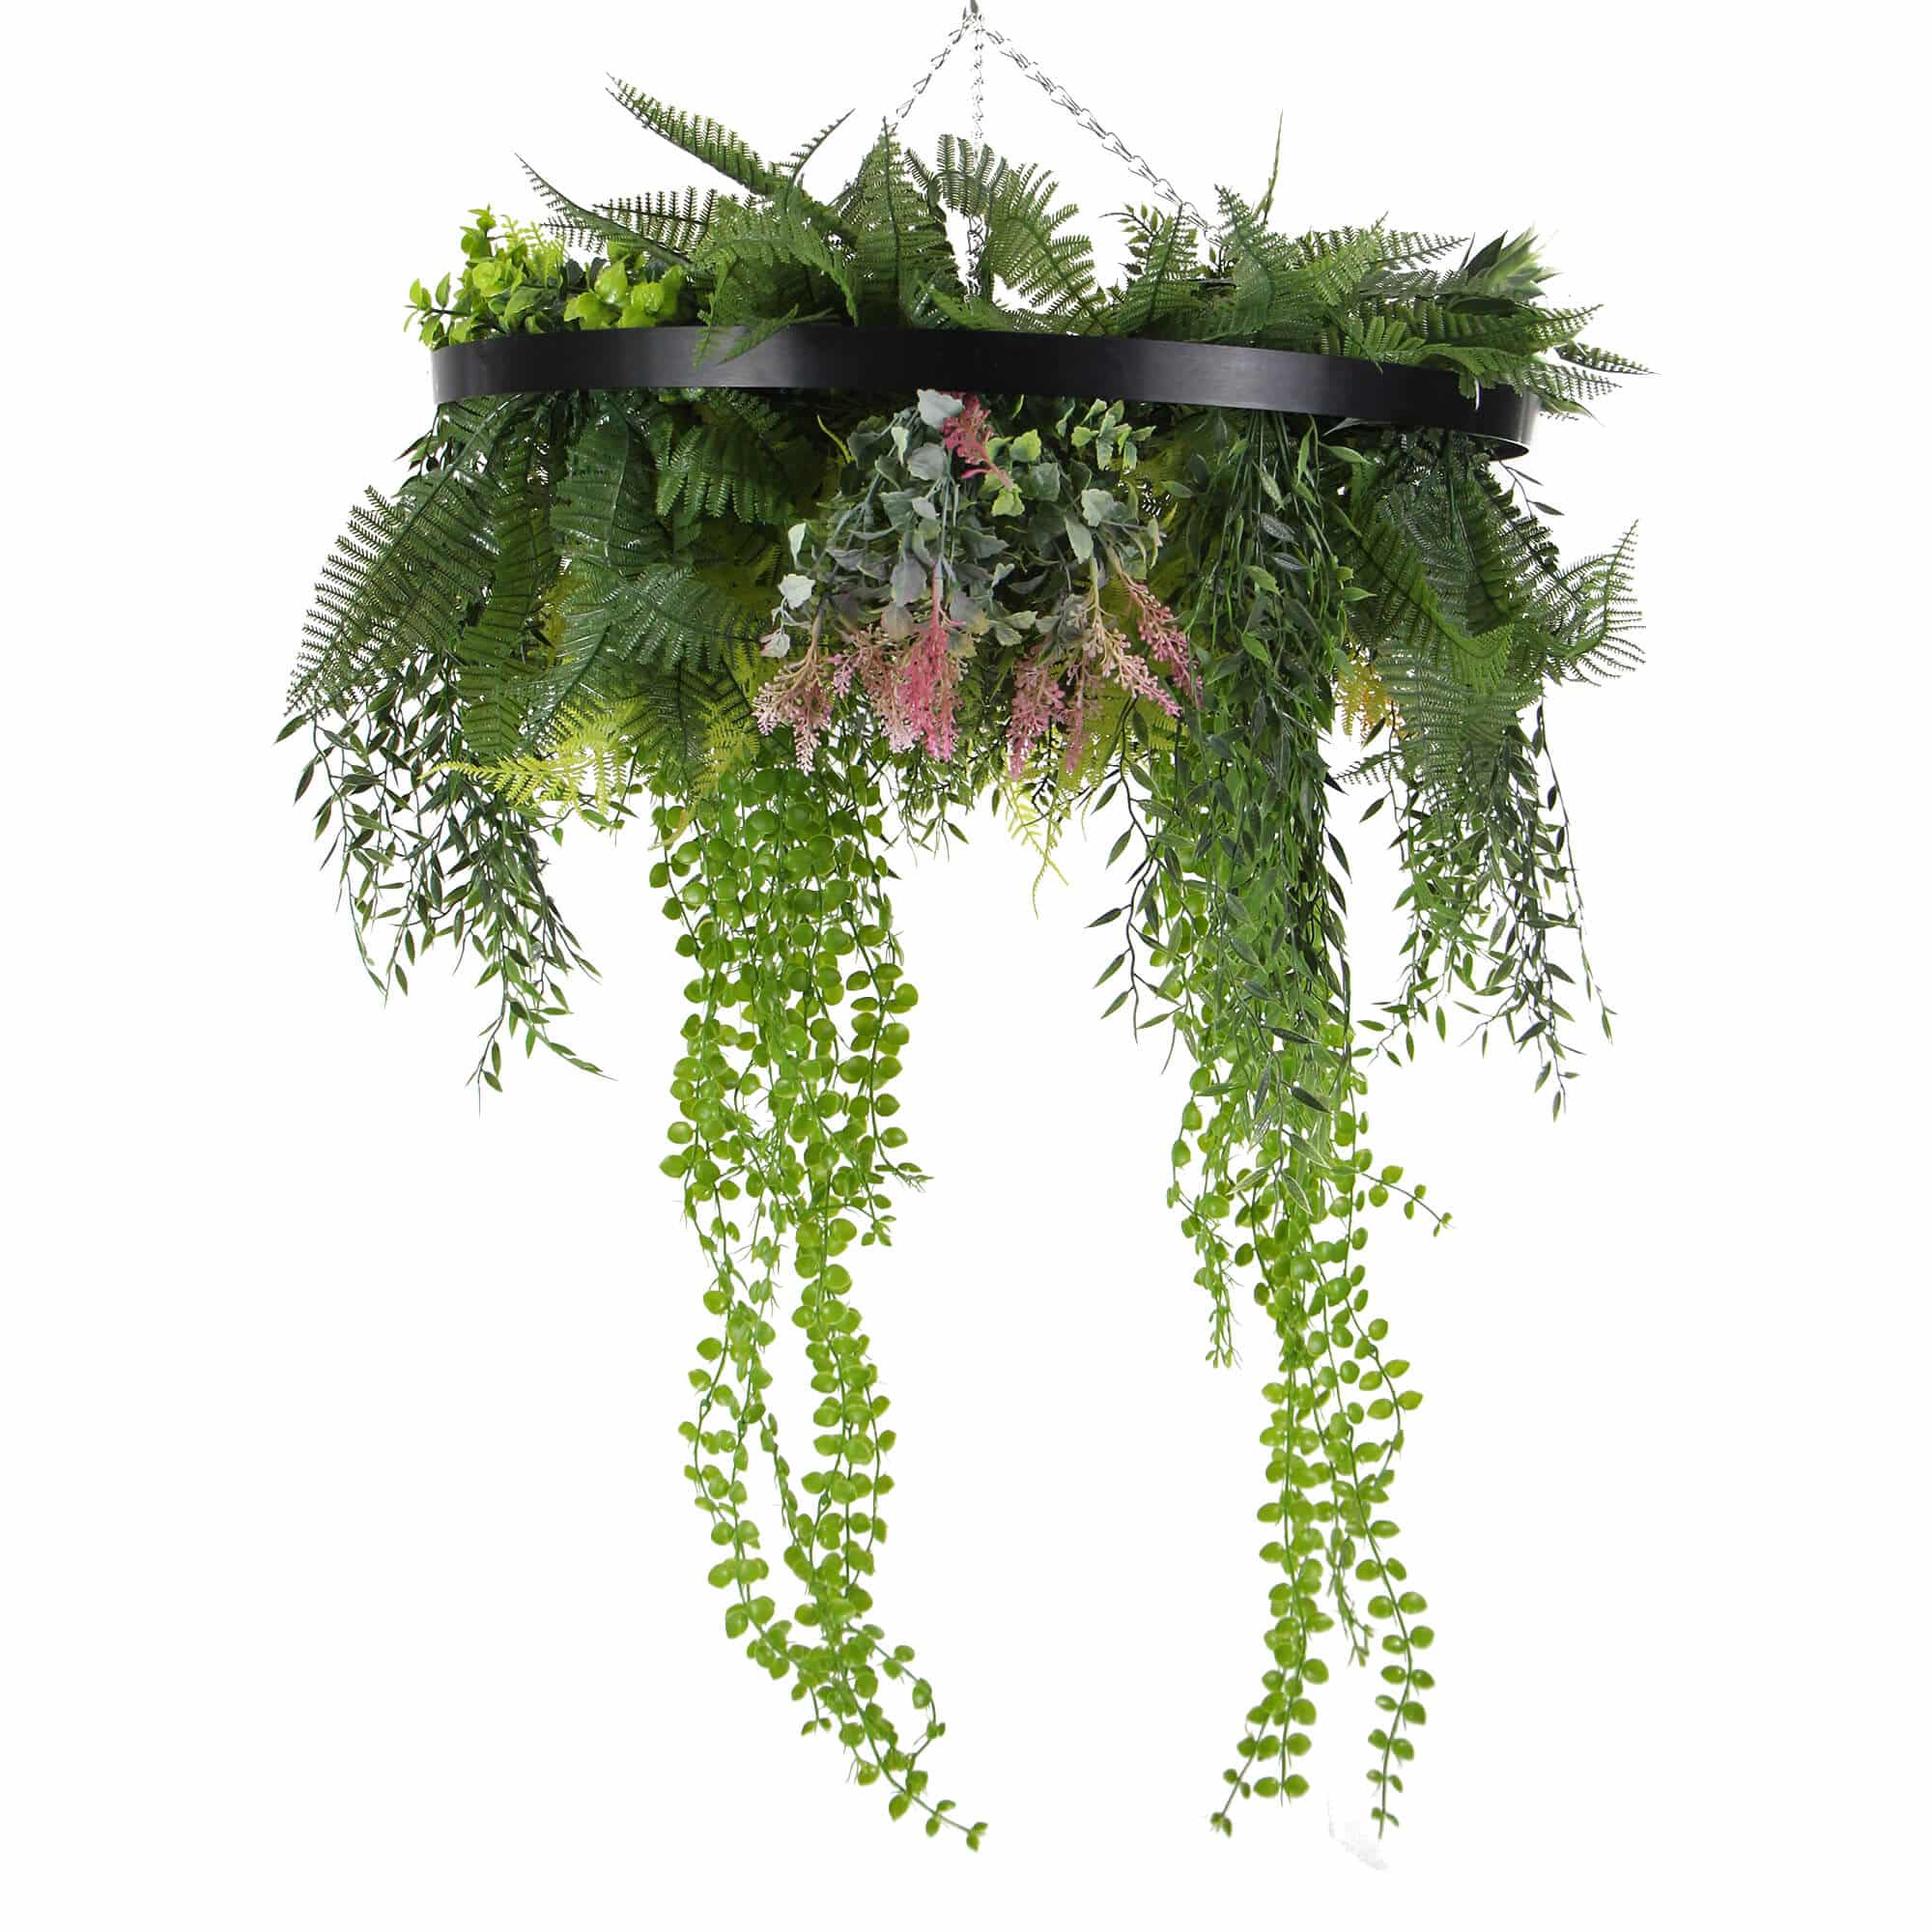 Black Framed Roof Hanging Disc with Draping Pearls Ferns 60cm Diameter Hanging Faux Pearls with Plastic Plants